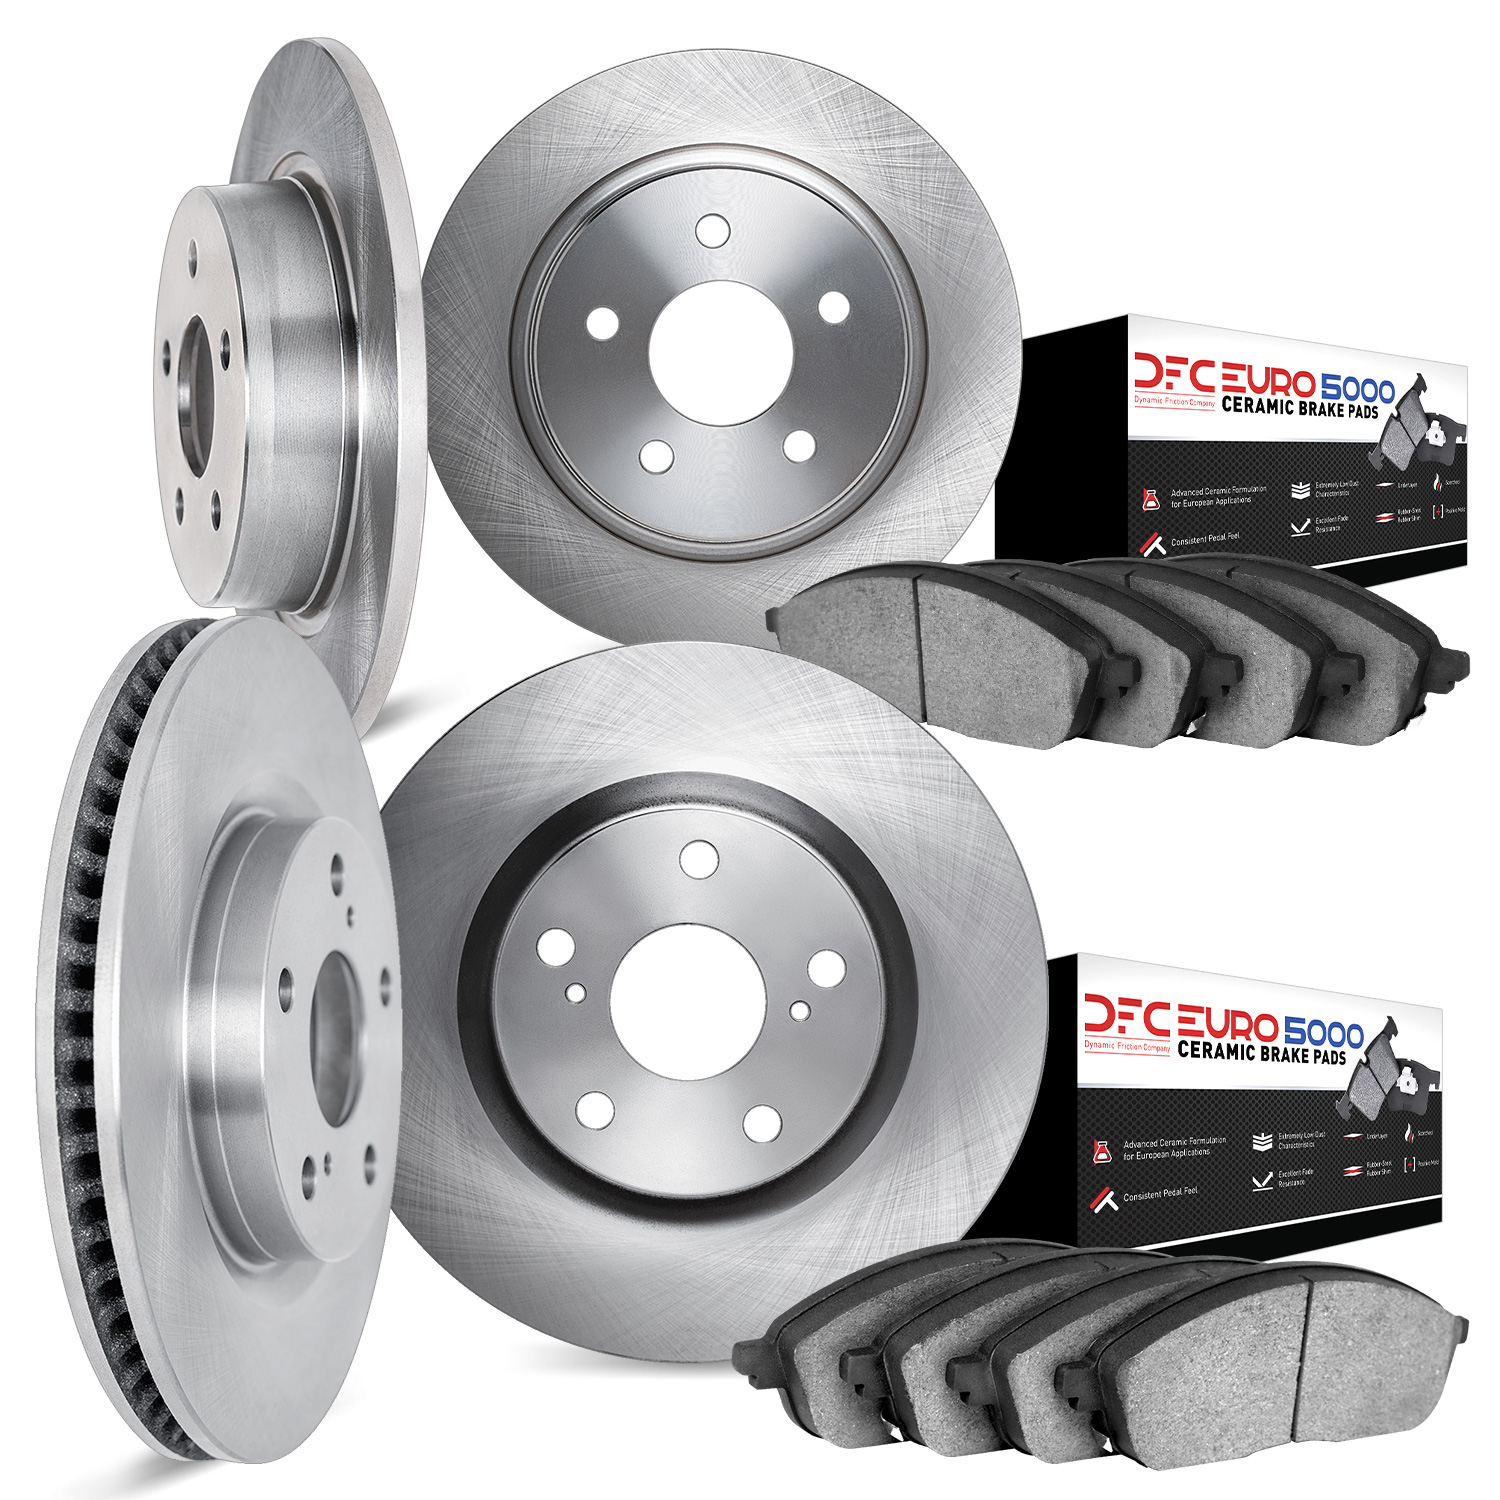 6604-31009 Brake Rotors w/5000 Euro Ceramic Brake Pads, 1989-1995 BMW, Position: Front and Rear